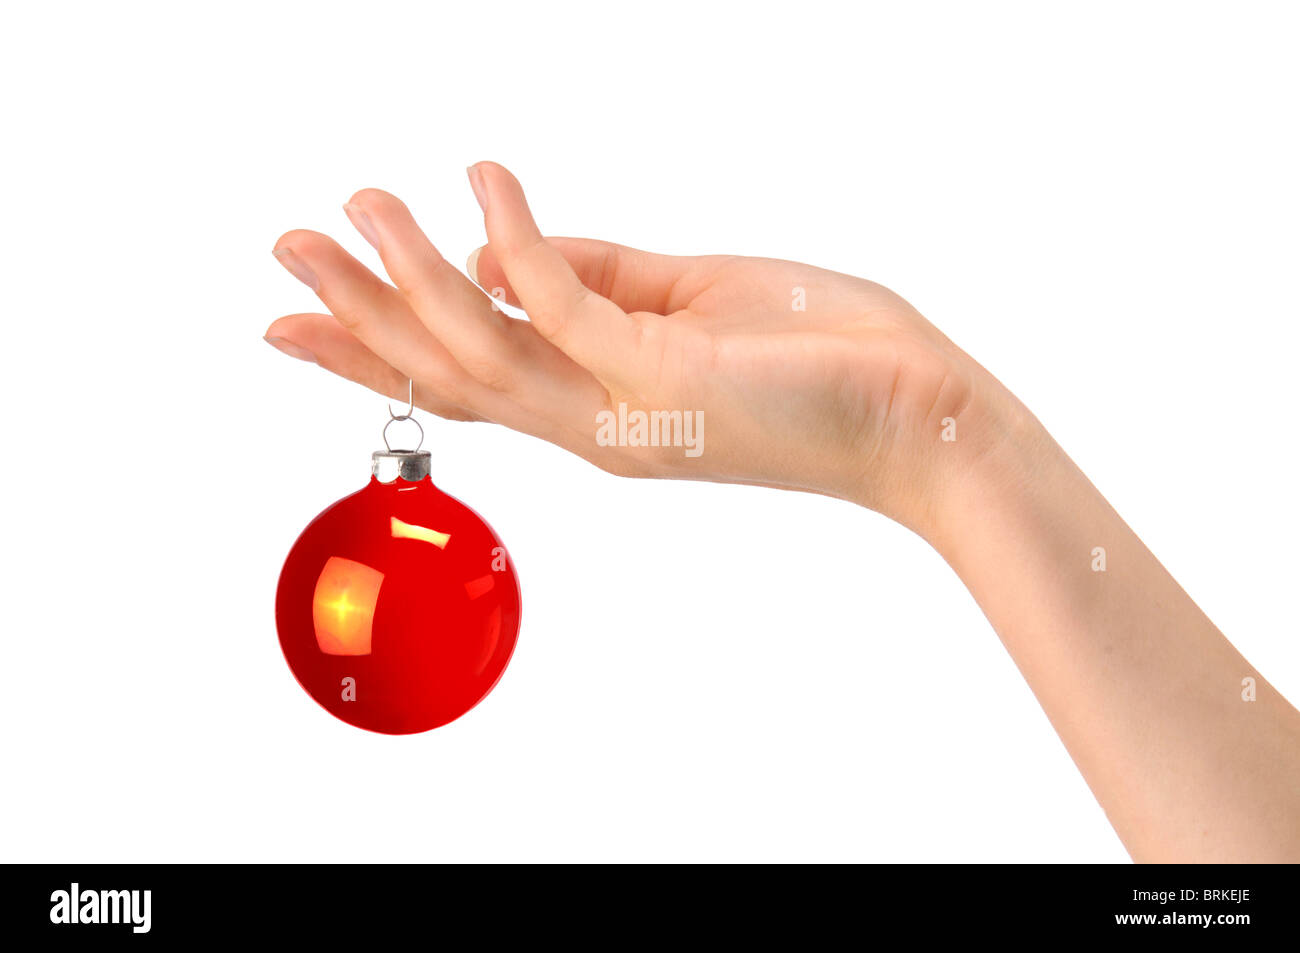 hand holding red christman ornament Stock Photo